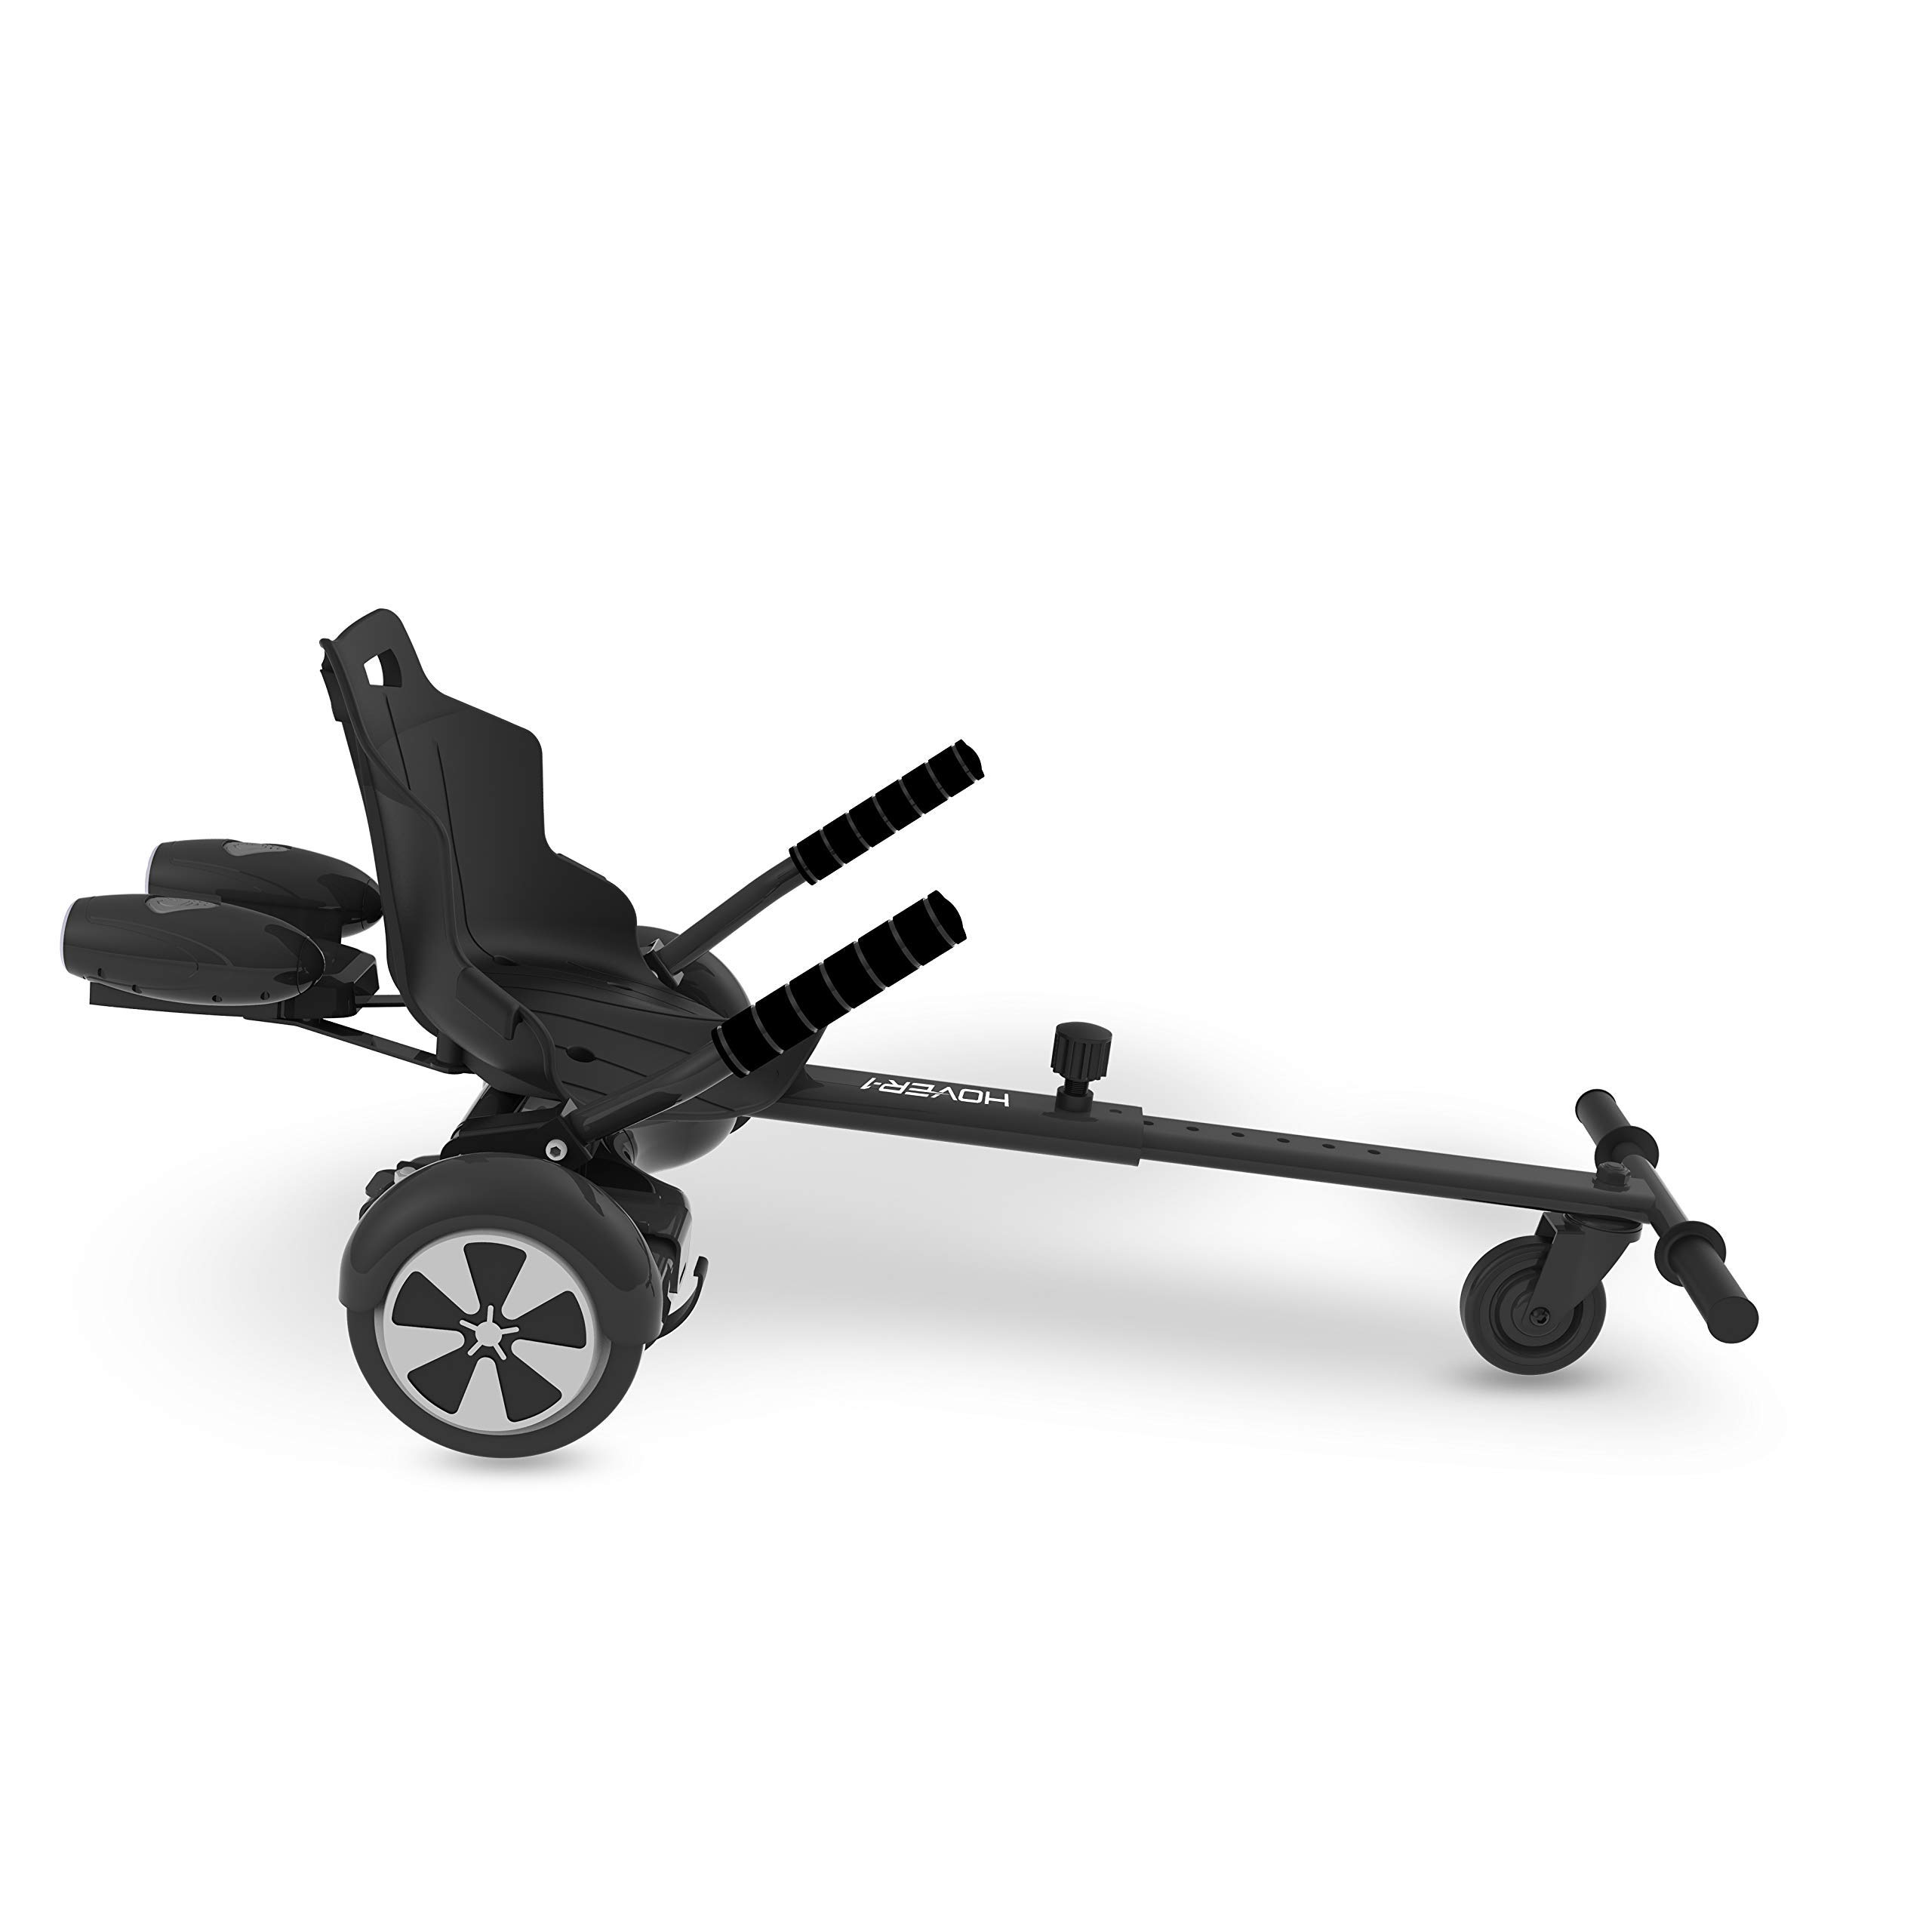 Hover-1 Falcon-1 Buggy Attachment | Turbo LED Lights, Compatible with All 6.5